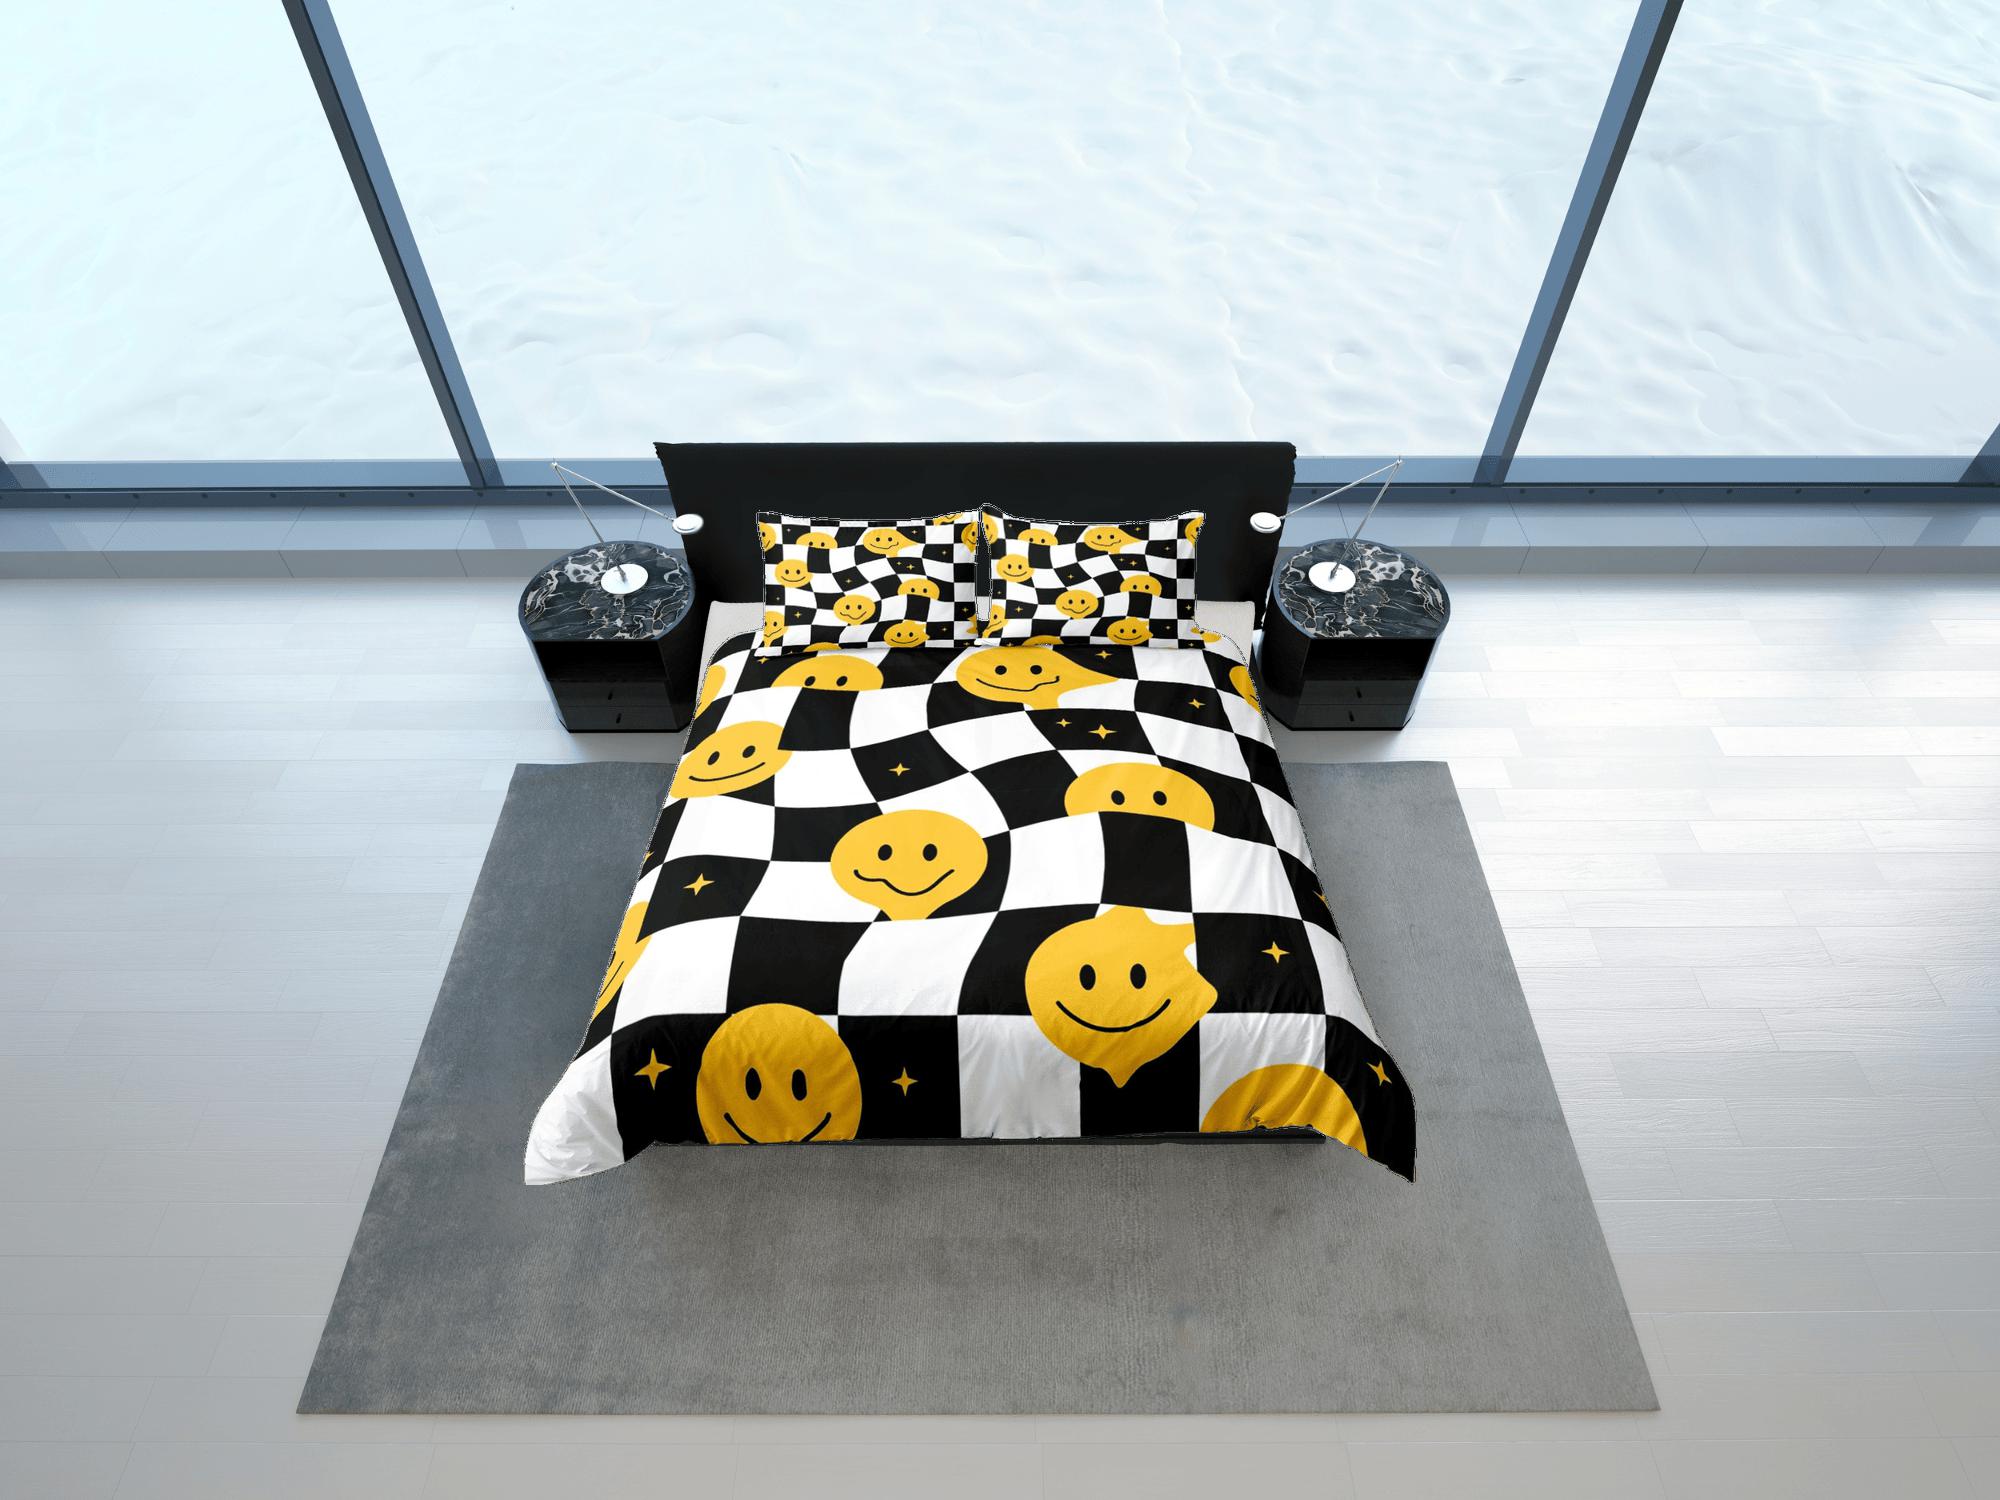 daintyduvet Smiley face 90s nostalgia hippie bedding retro duvet cover set, colorful bedding, teens and adult duvet cover, maximalist decor, chess board